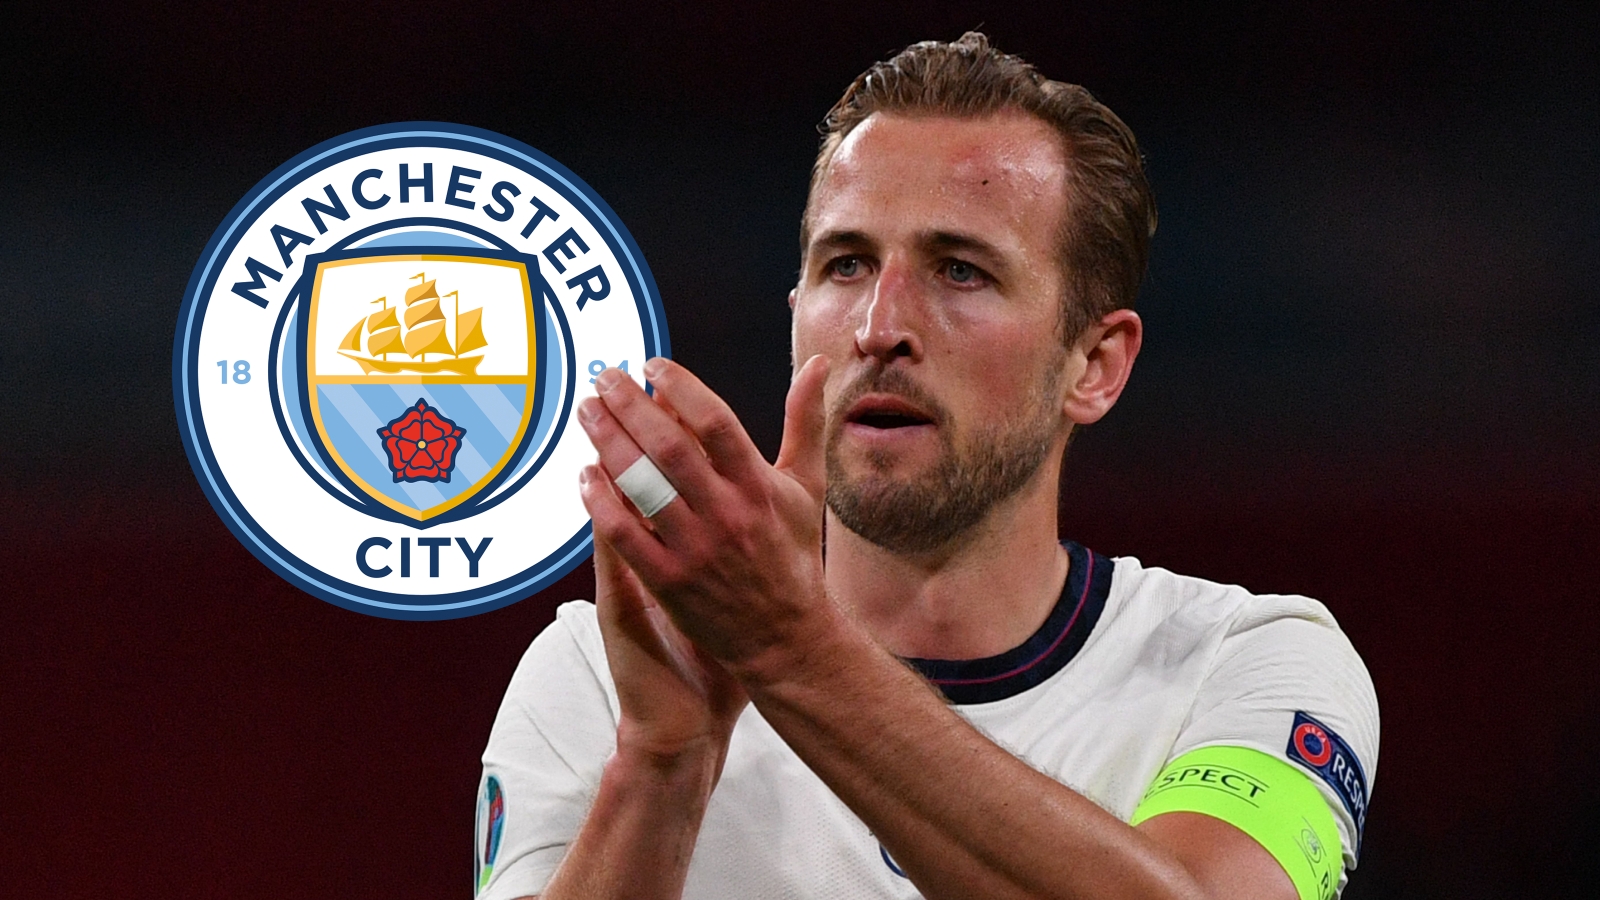 Kane fuels Manchester City transfer rumours by failing to report for Tottenham training